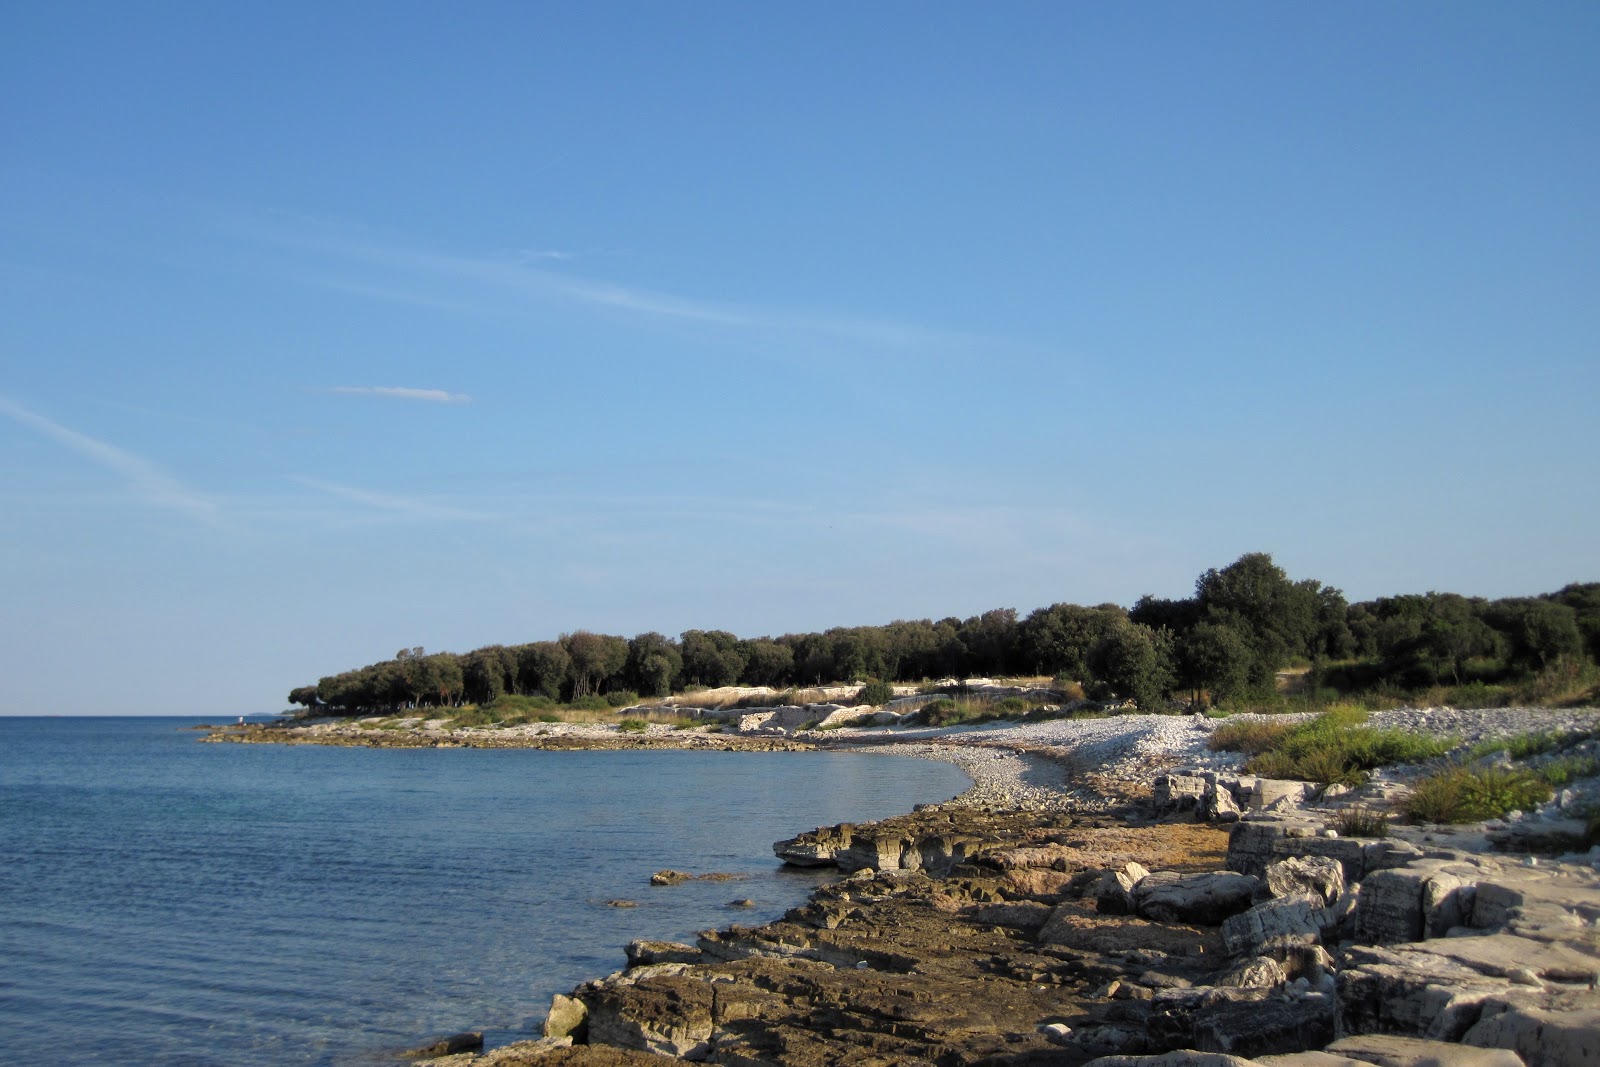 Photo of Dragonera beach with rocks cover surface